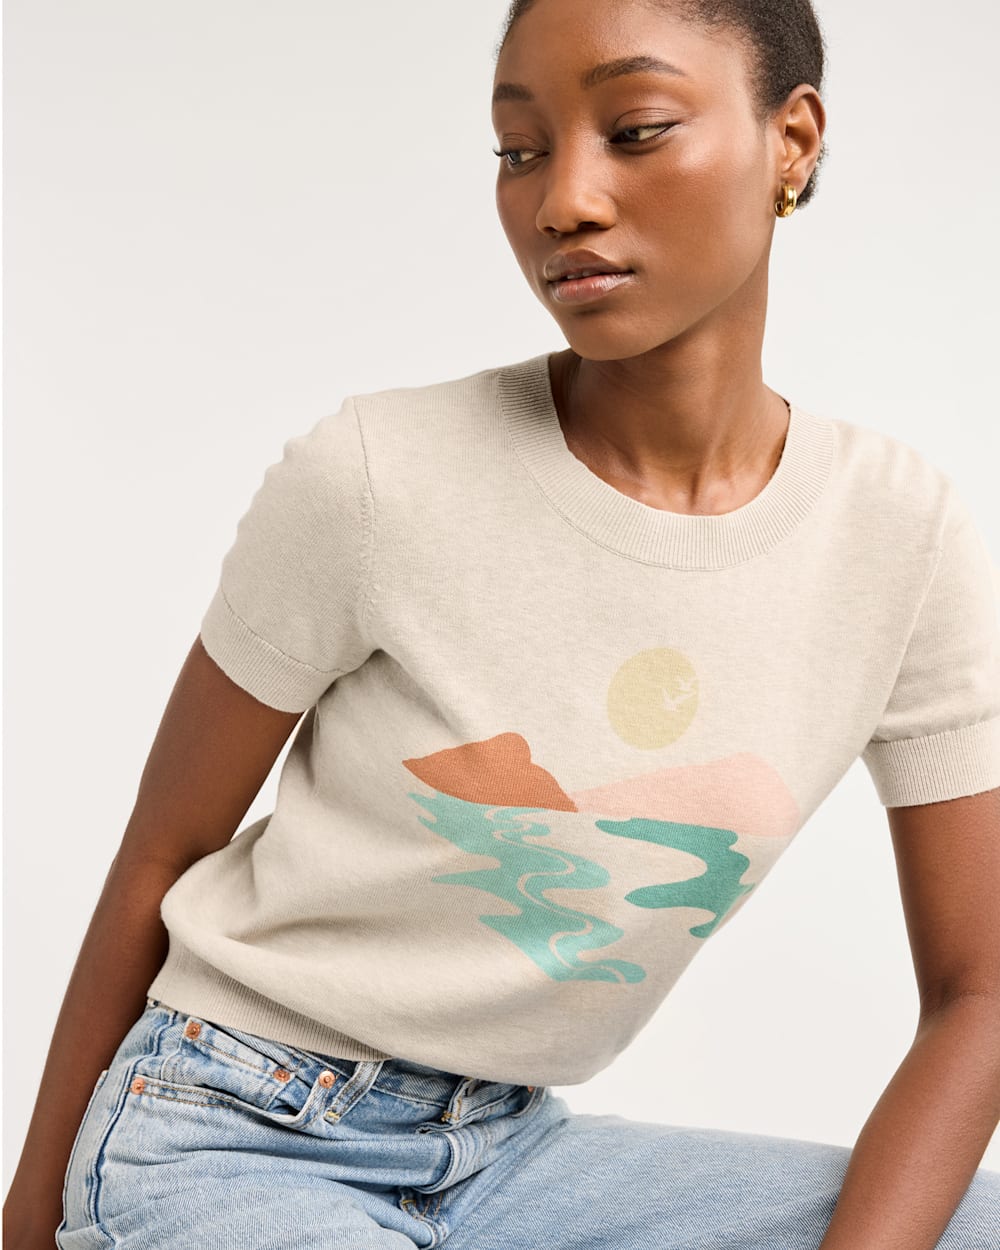 ALTERNATE VIEW OF WOMEN'S COASTAL SUNSET COTTON PULLOVER IN DRIFTWOOD MULTI image number 4